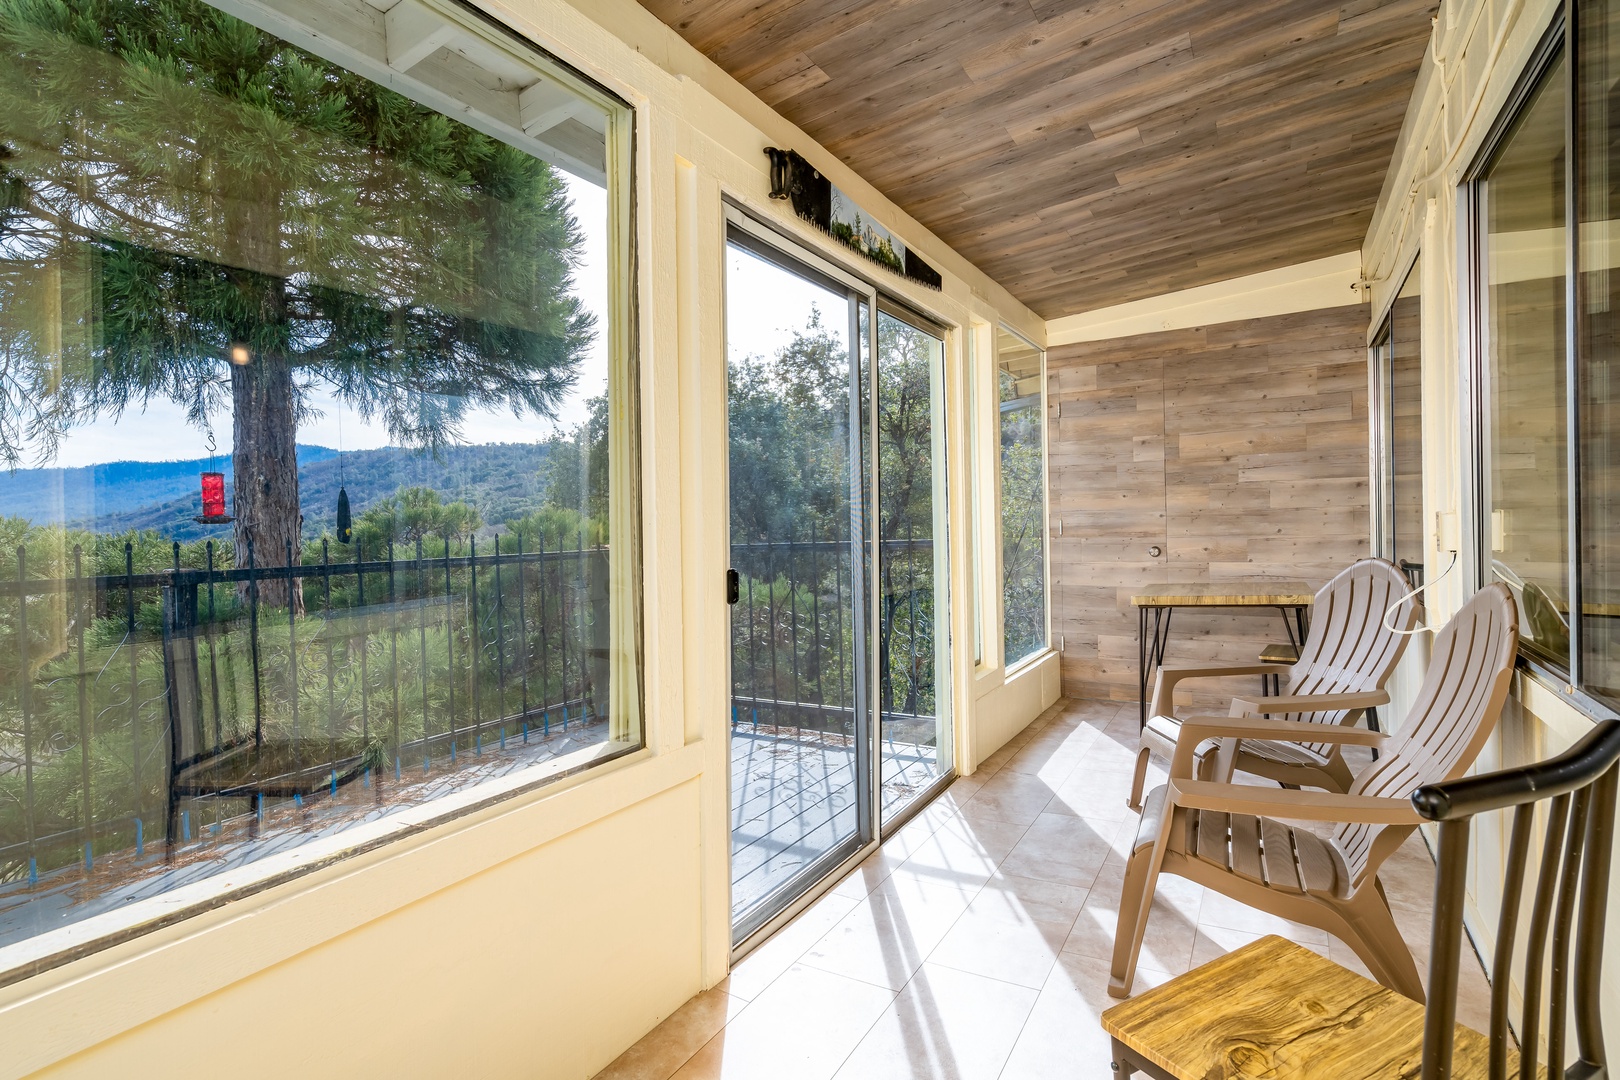 Unwind in the sunroom, basking in the beauty of breathtaking natural views